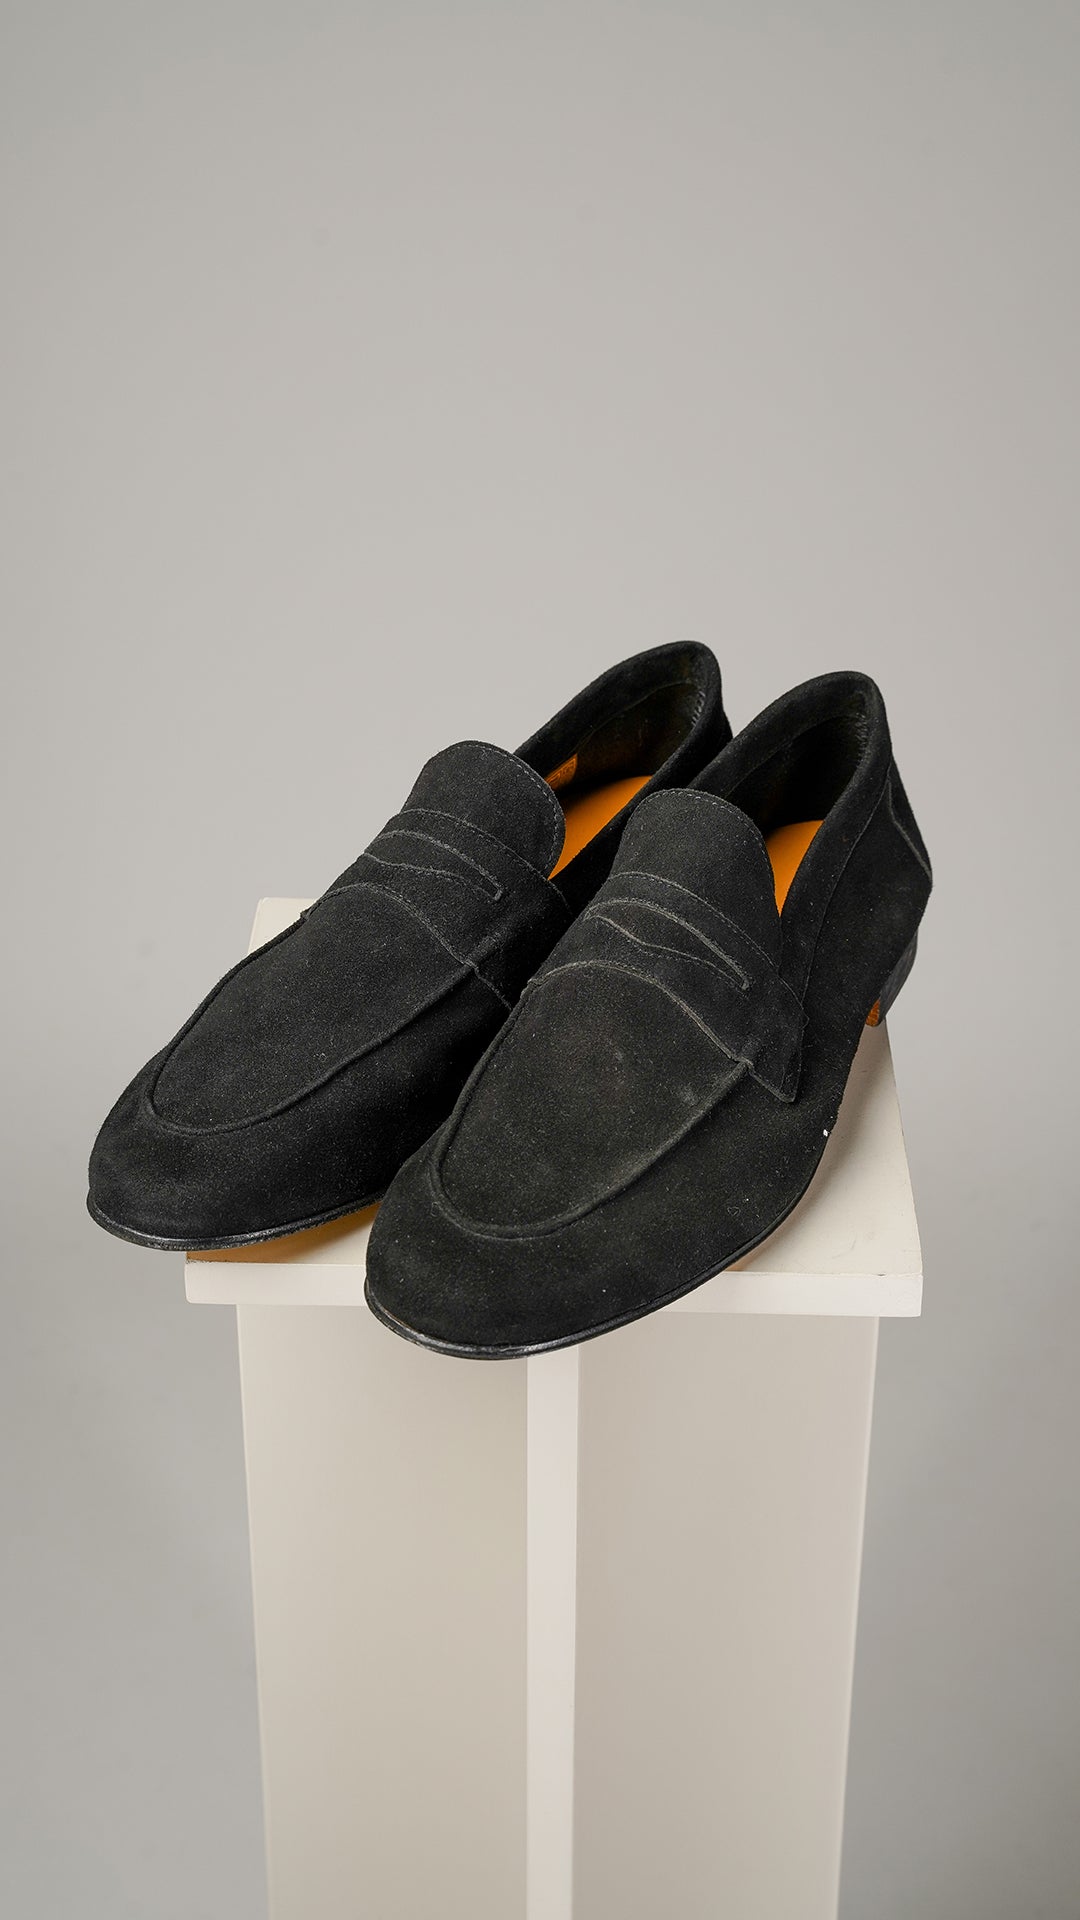 Antica Couieria ruskinds loafers